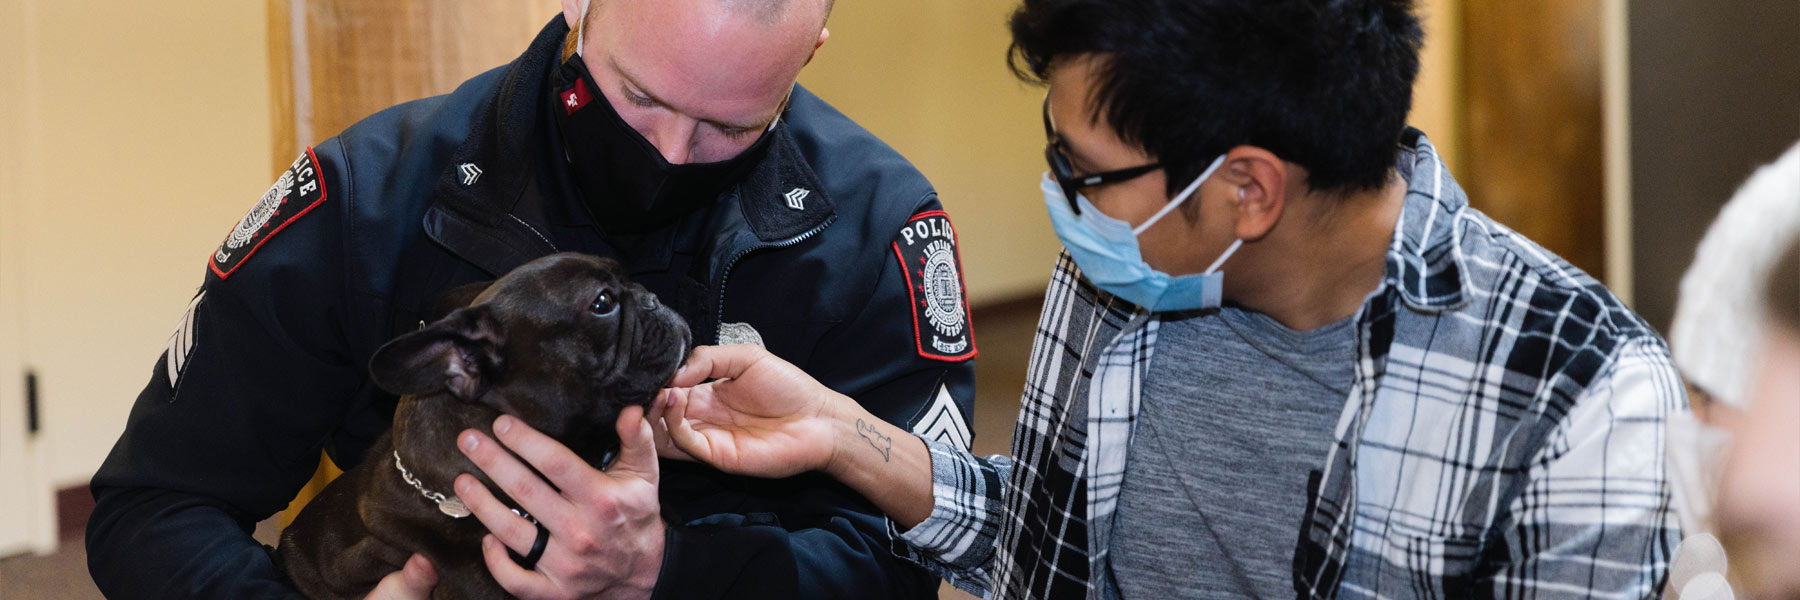 A young masked student tickles the chin of a French Bulldog being held by a member of IU Southeast's Police department during a mental health support animal event.